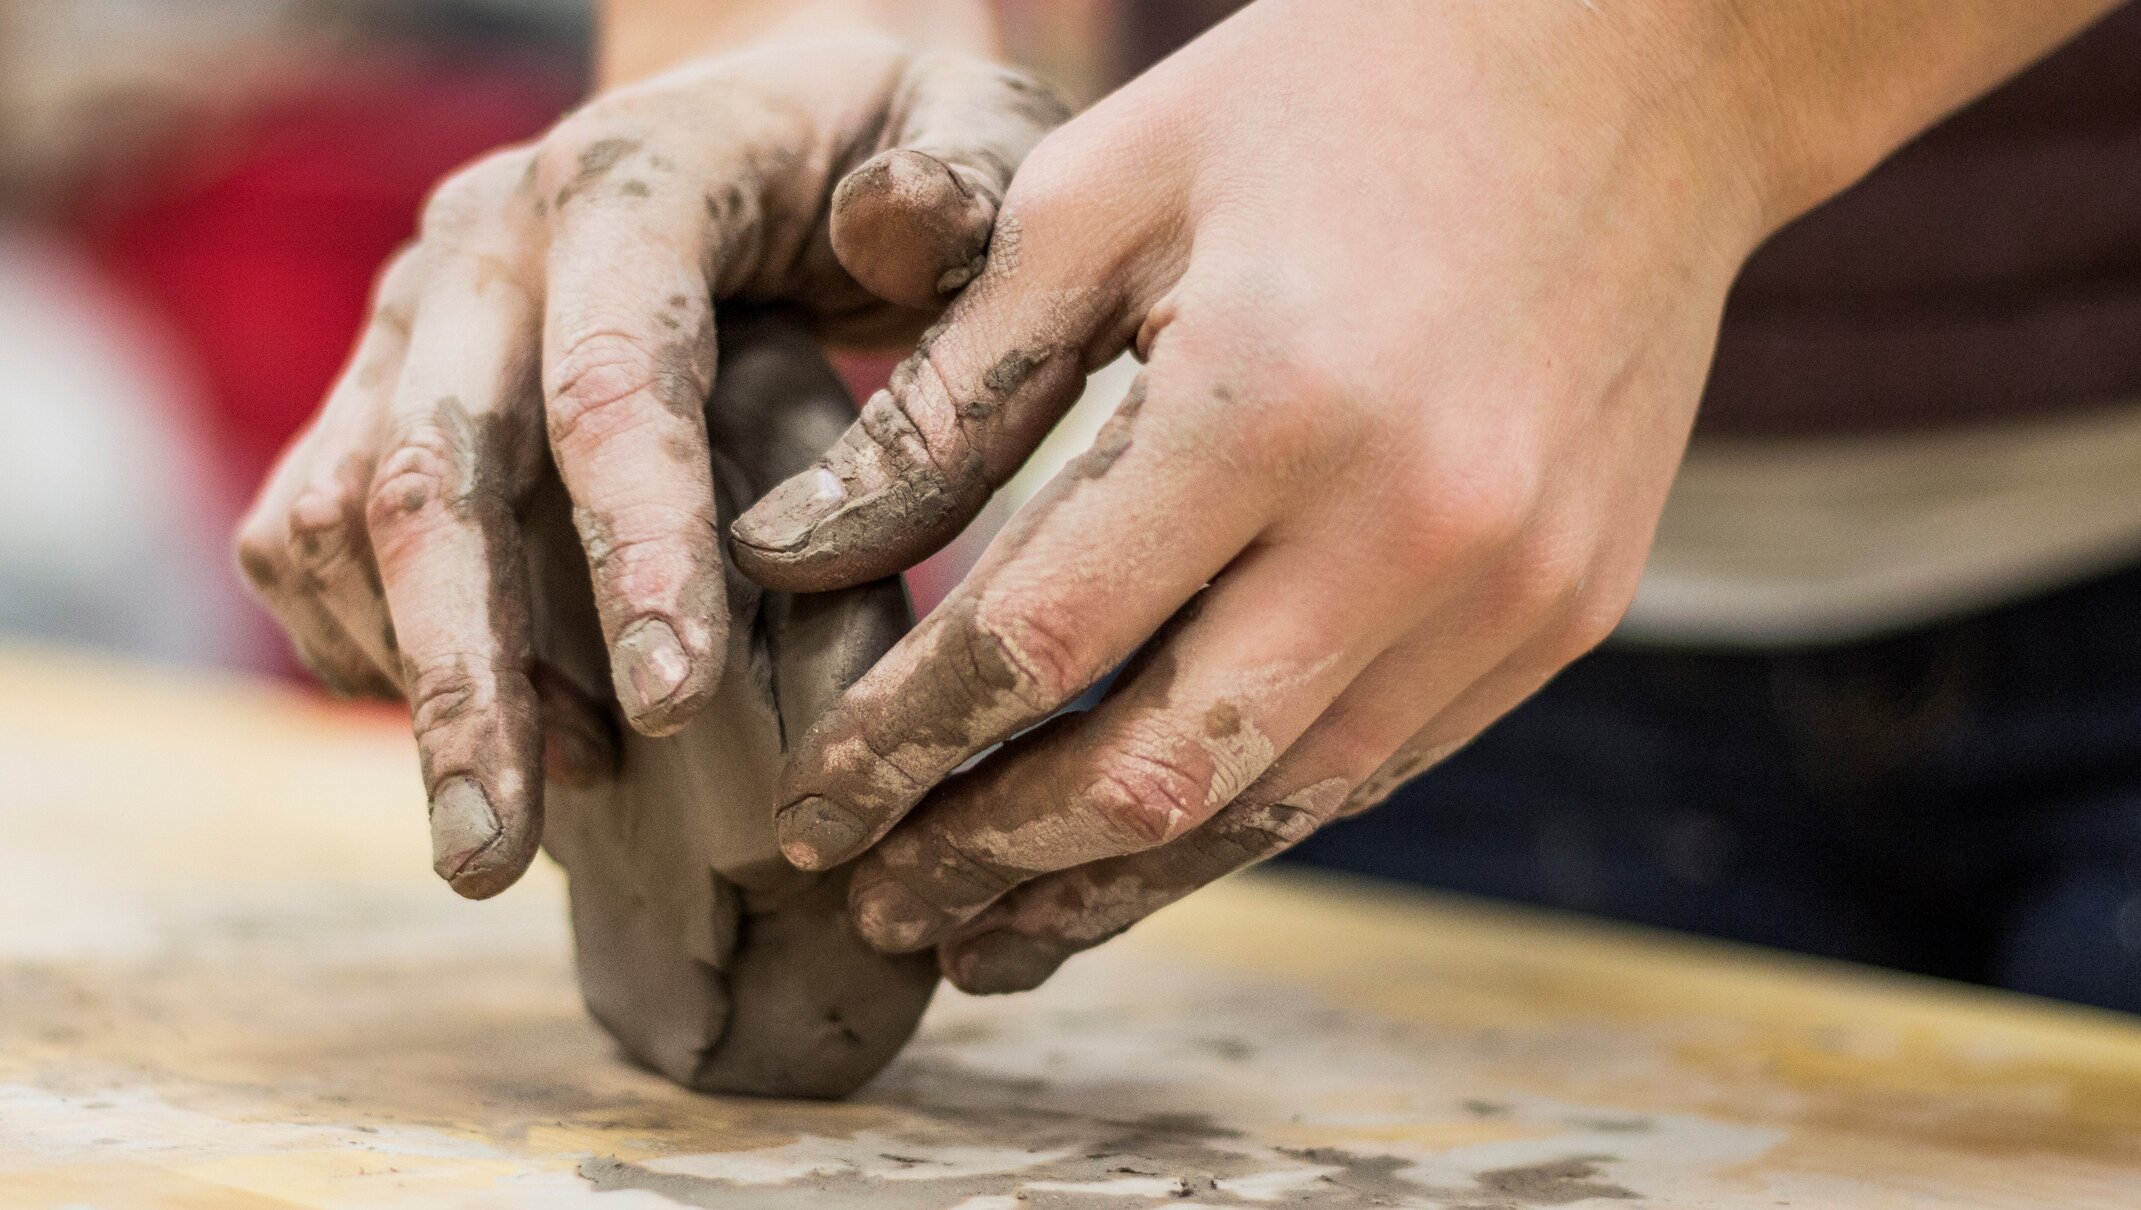 Excellence requires much practice. This is depicted by a two hands forming a piece of potter's clay.